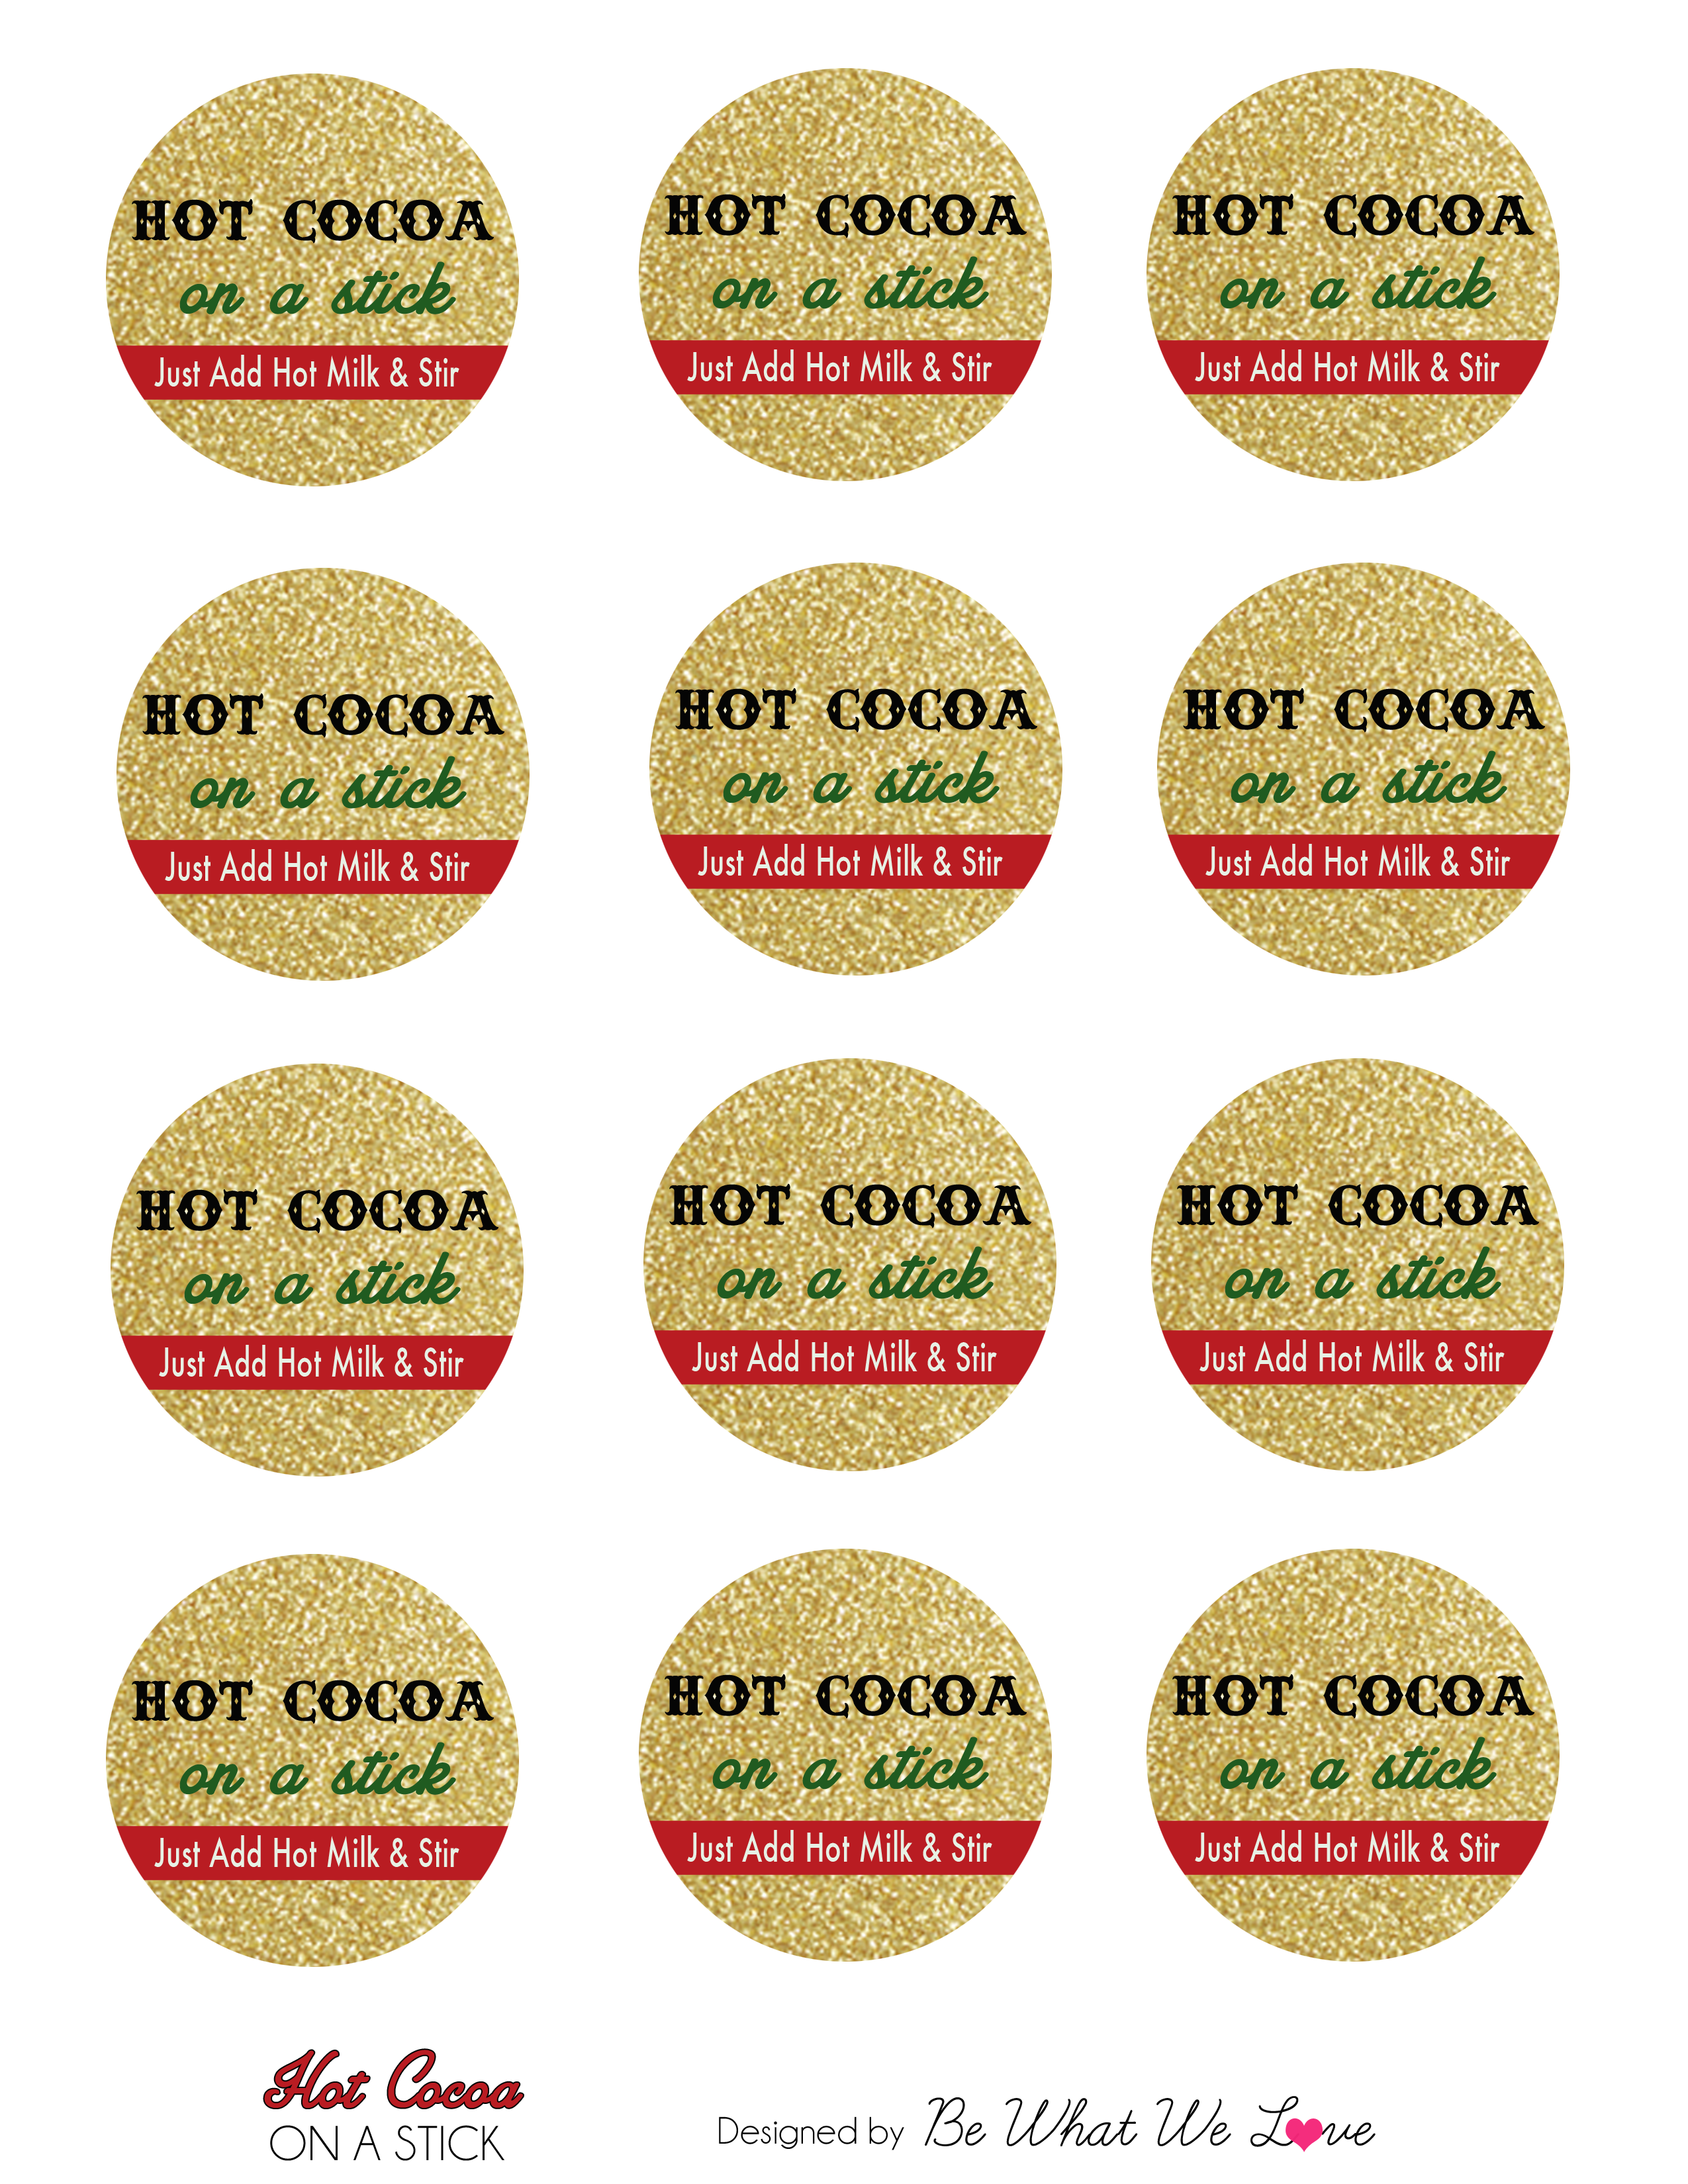 Hot Cocoa On A Stick - Free Label Template